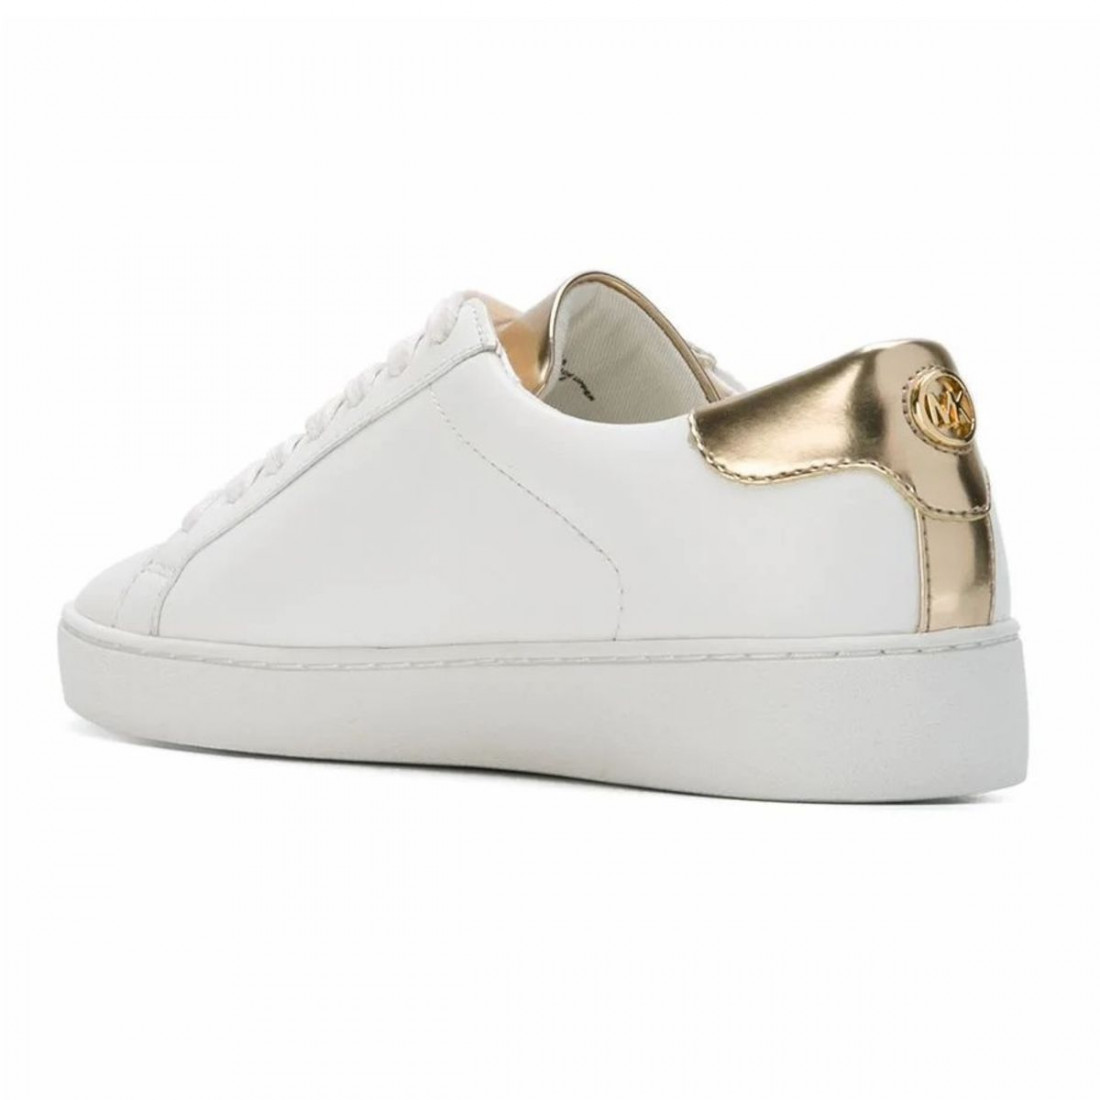 Michael Kors Irving womens sneaker in white and gold leather